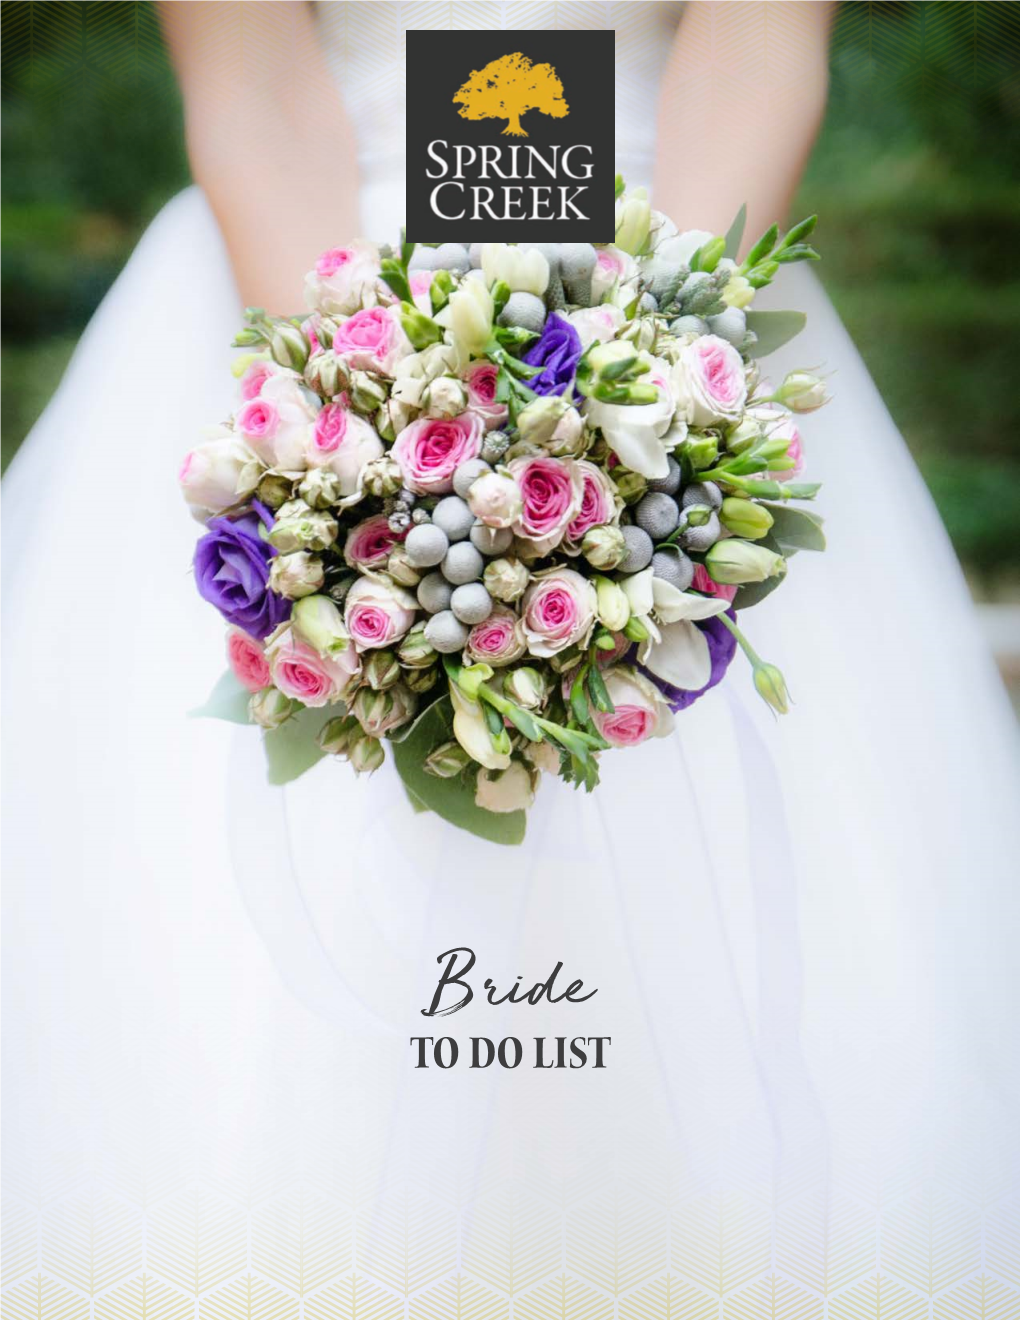 Bride-To-Be to Do List